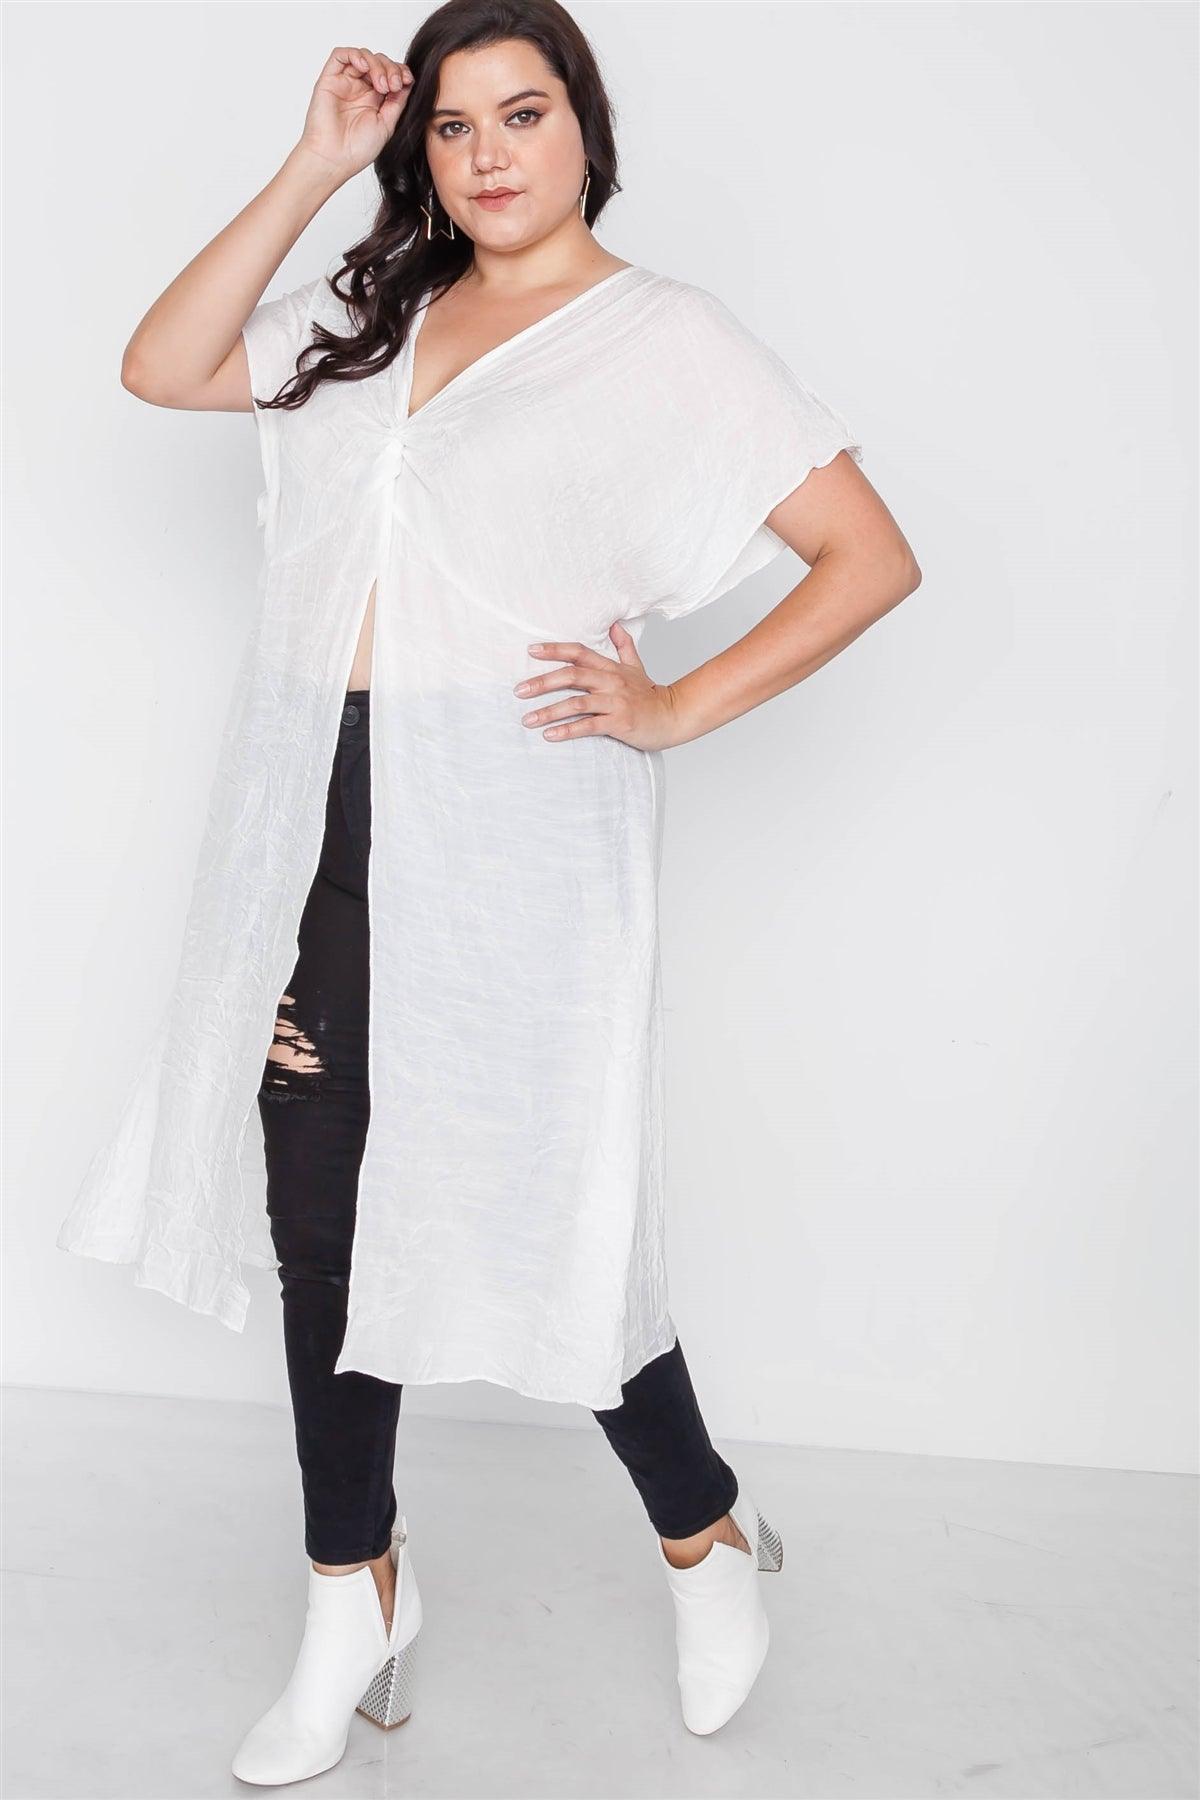 Plus Size White Front Slit Tunic Cover-Up Top